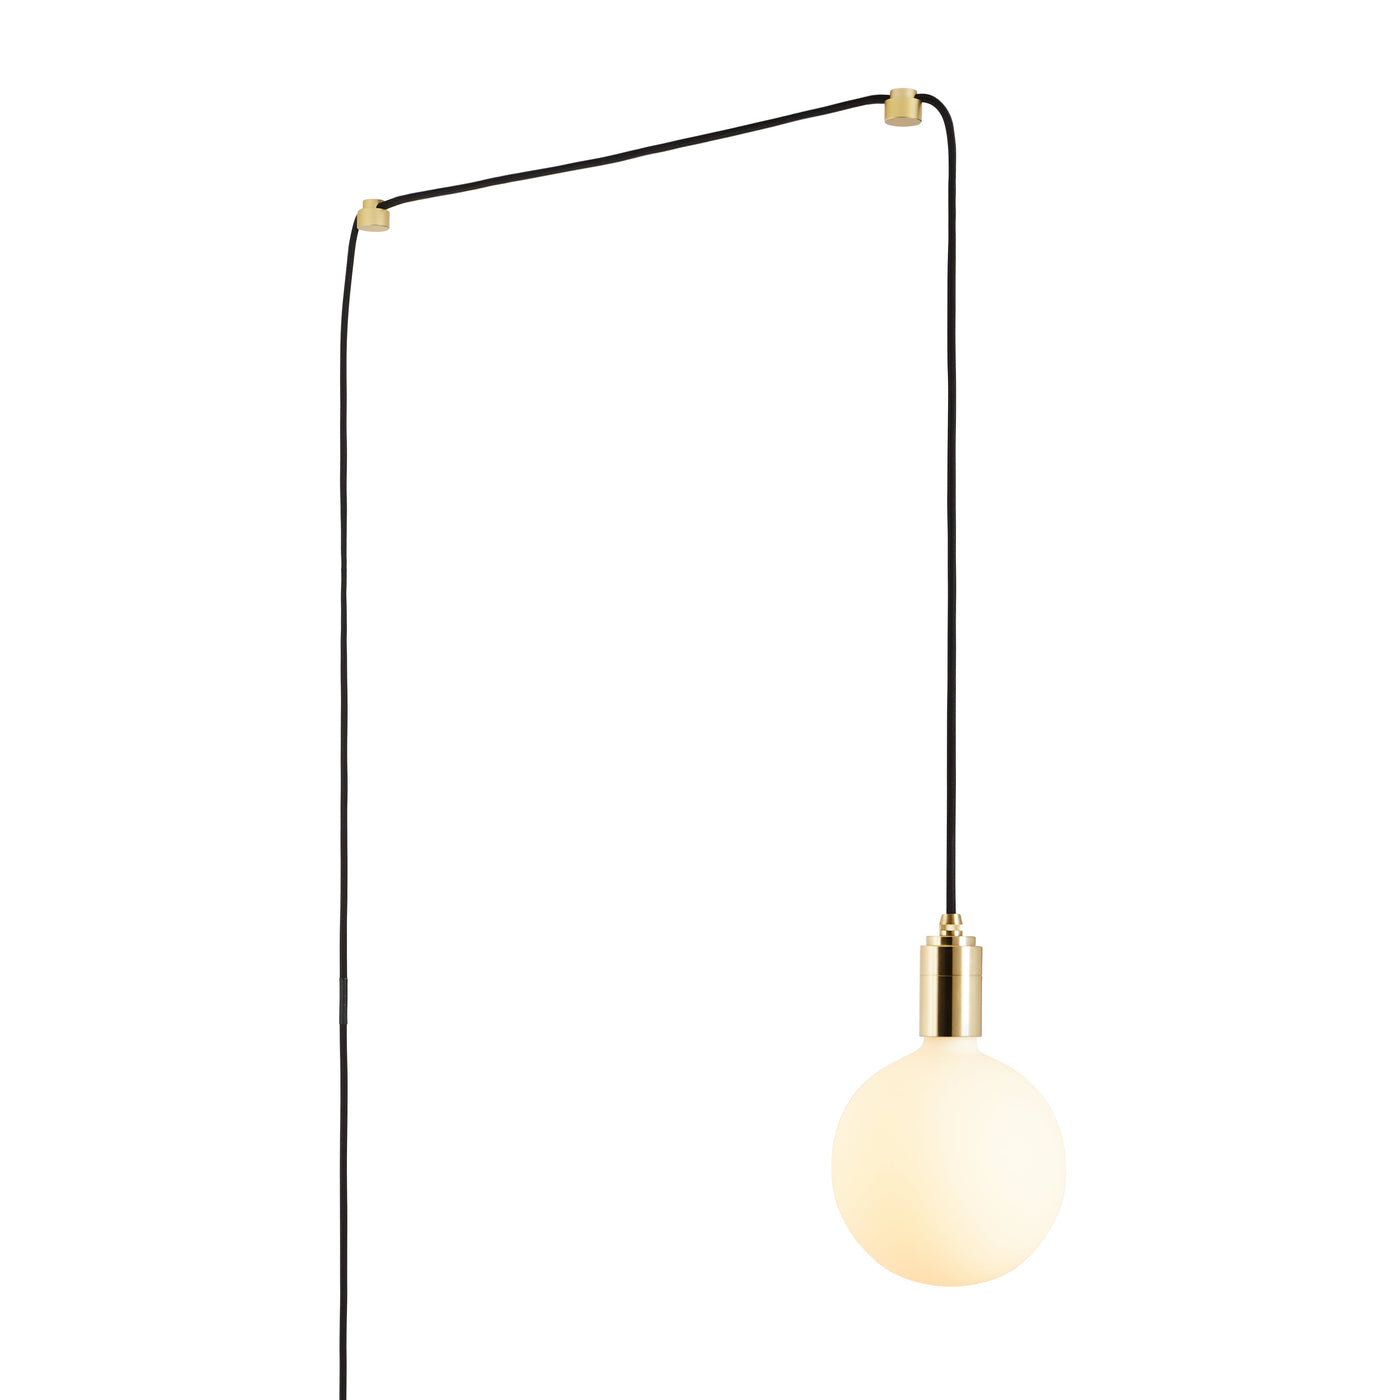 Tala plug-in brass pendant | sphere iv bulb. Free + fast UK delivery at someday designs. 